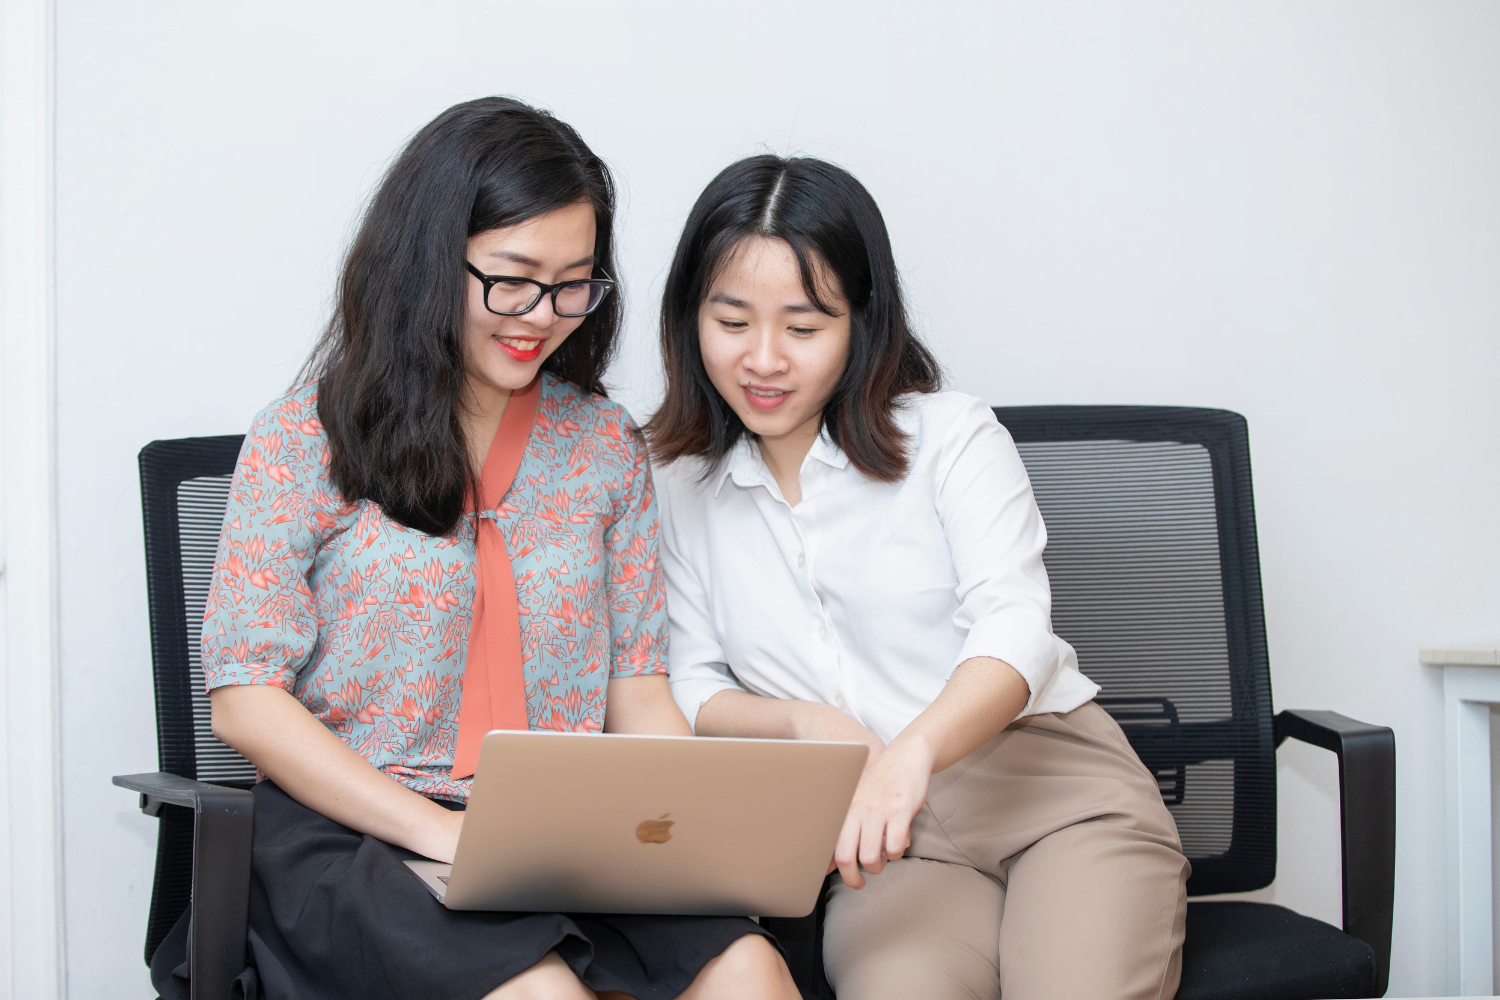 Quynh Nguyen, founder of AZCare, and WEAVE alumna works on the computer with a colleague